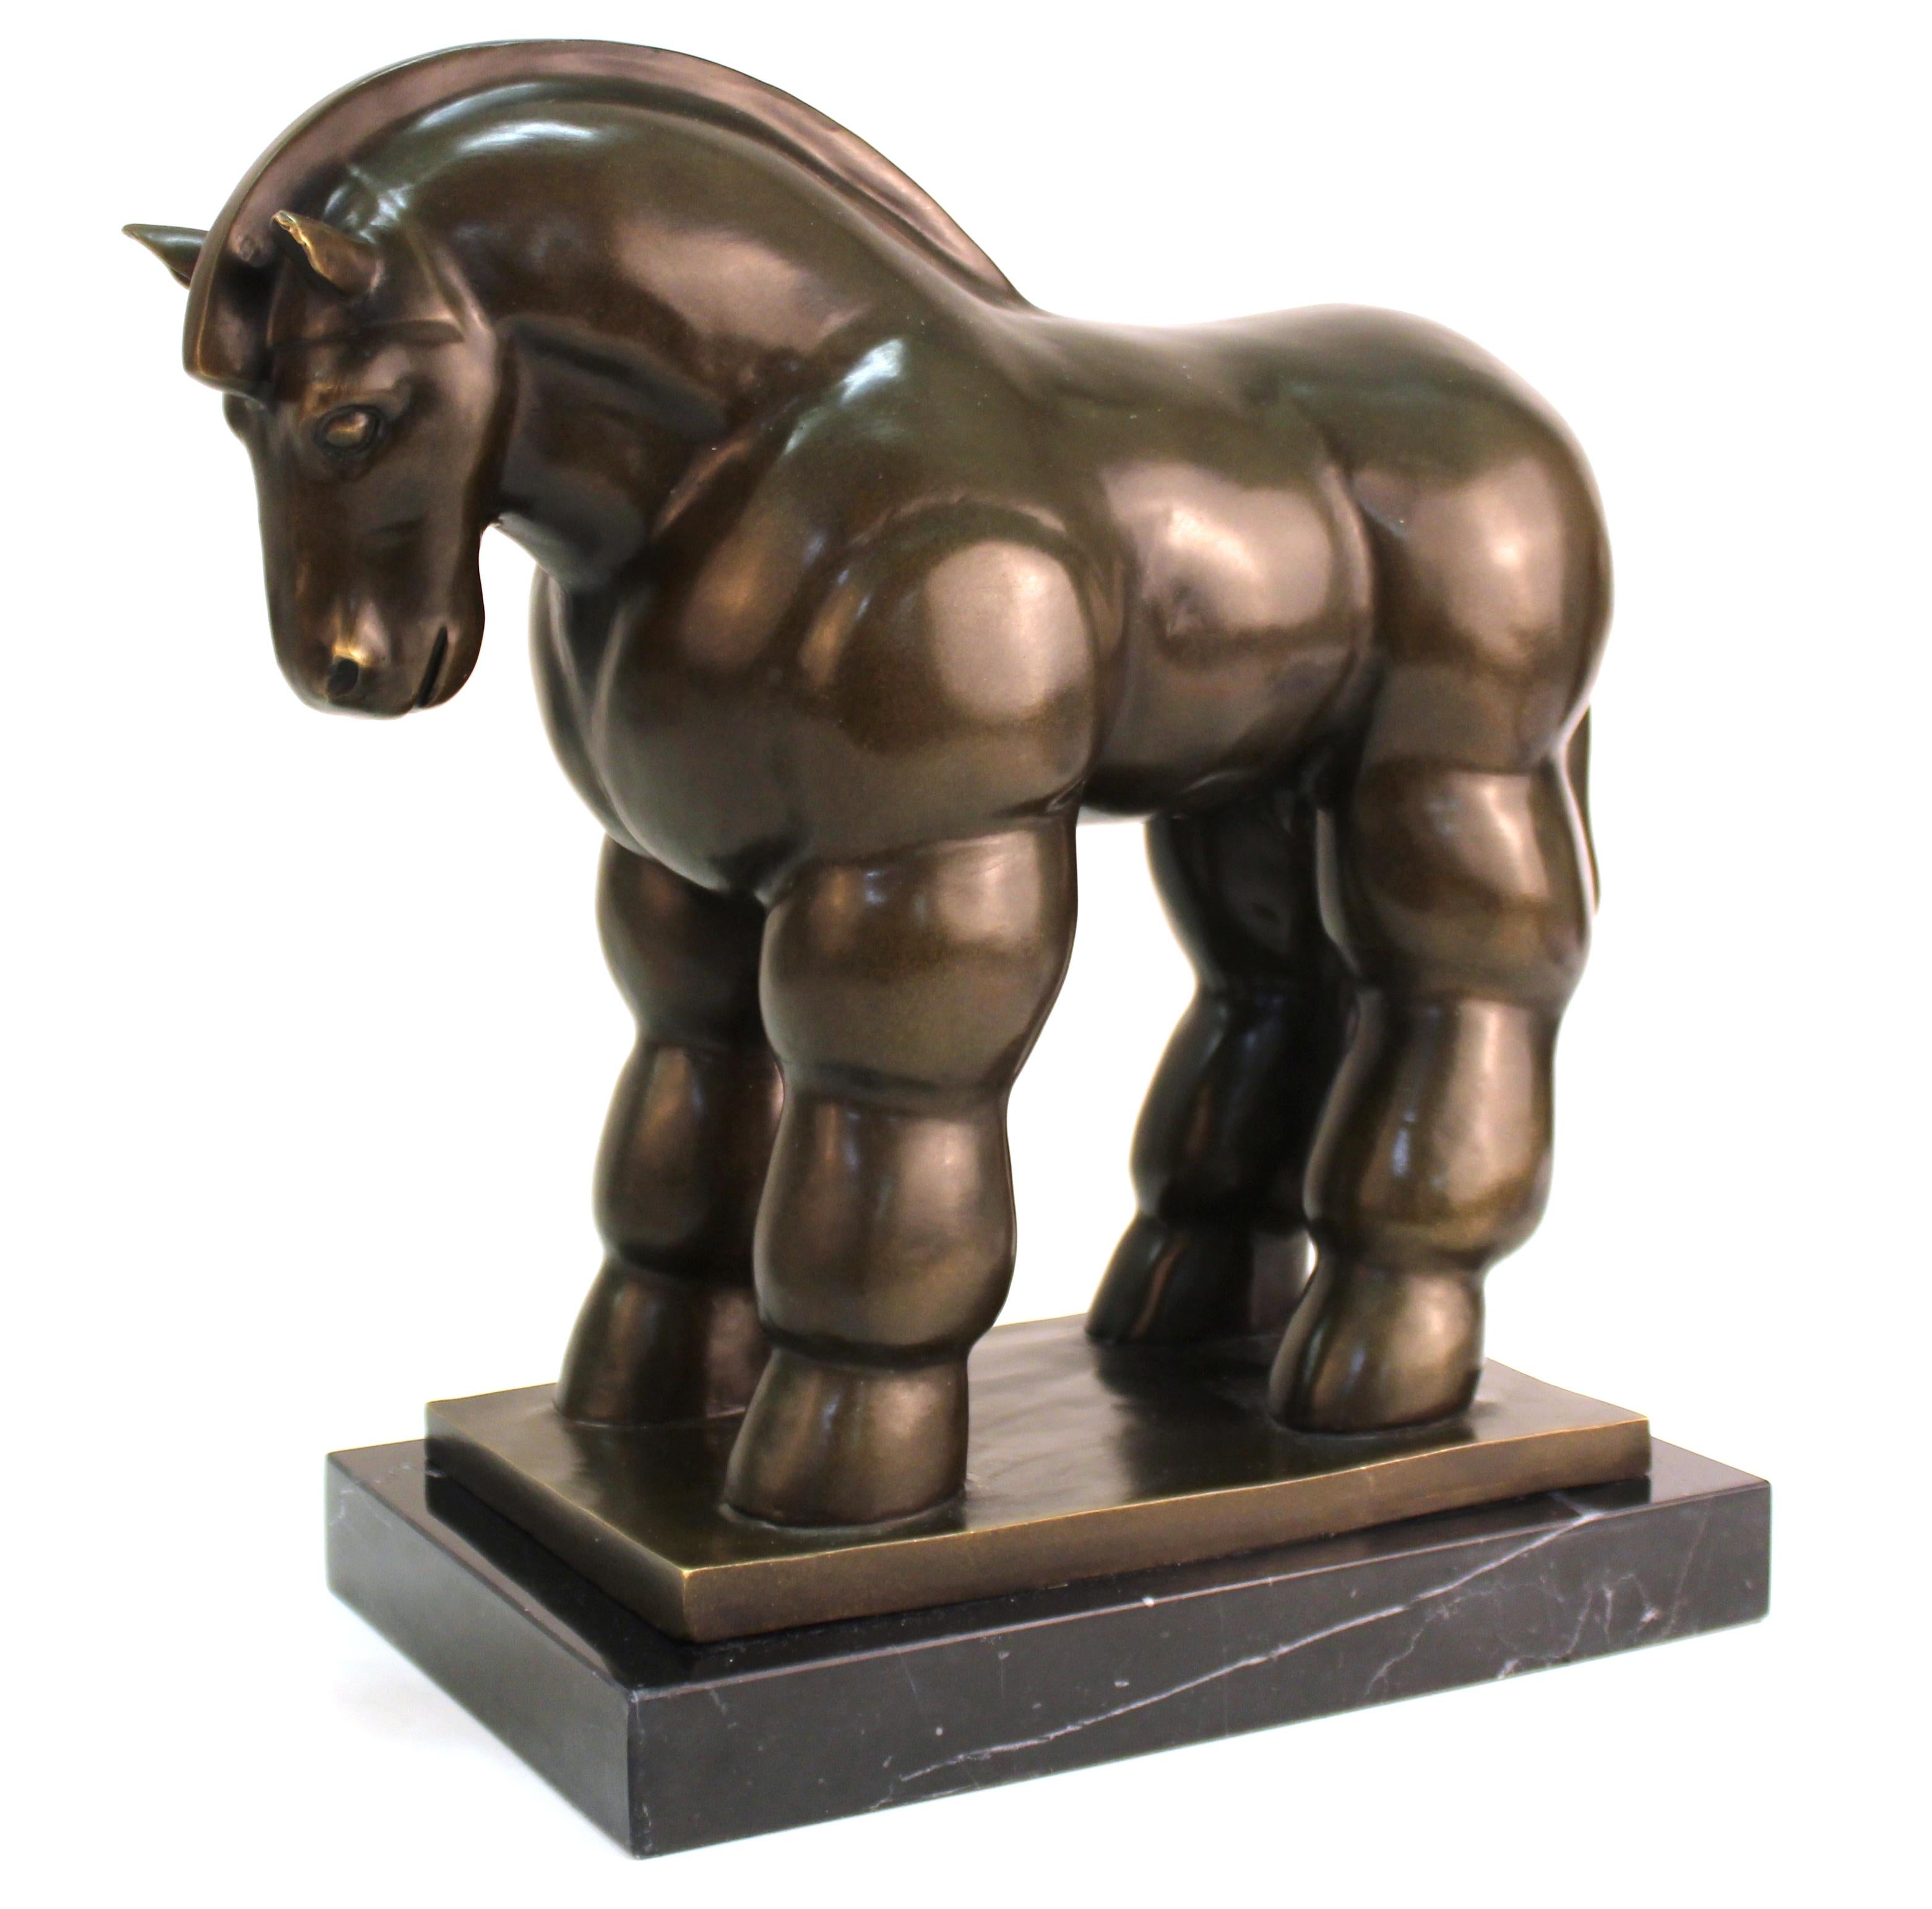 Modern sculpture of a standing horse in cast bronze by Fernando Botero. The piece is mounted on a veined black marble base and is signed 'Botero' on the back side of the bronze base. In great vintage condition with age-appropriate wear and use.